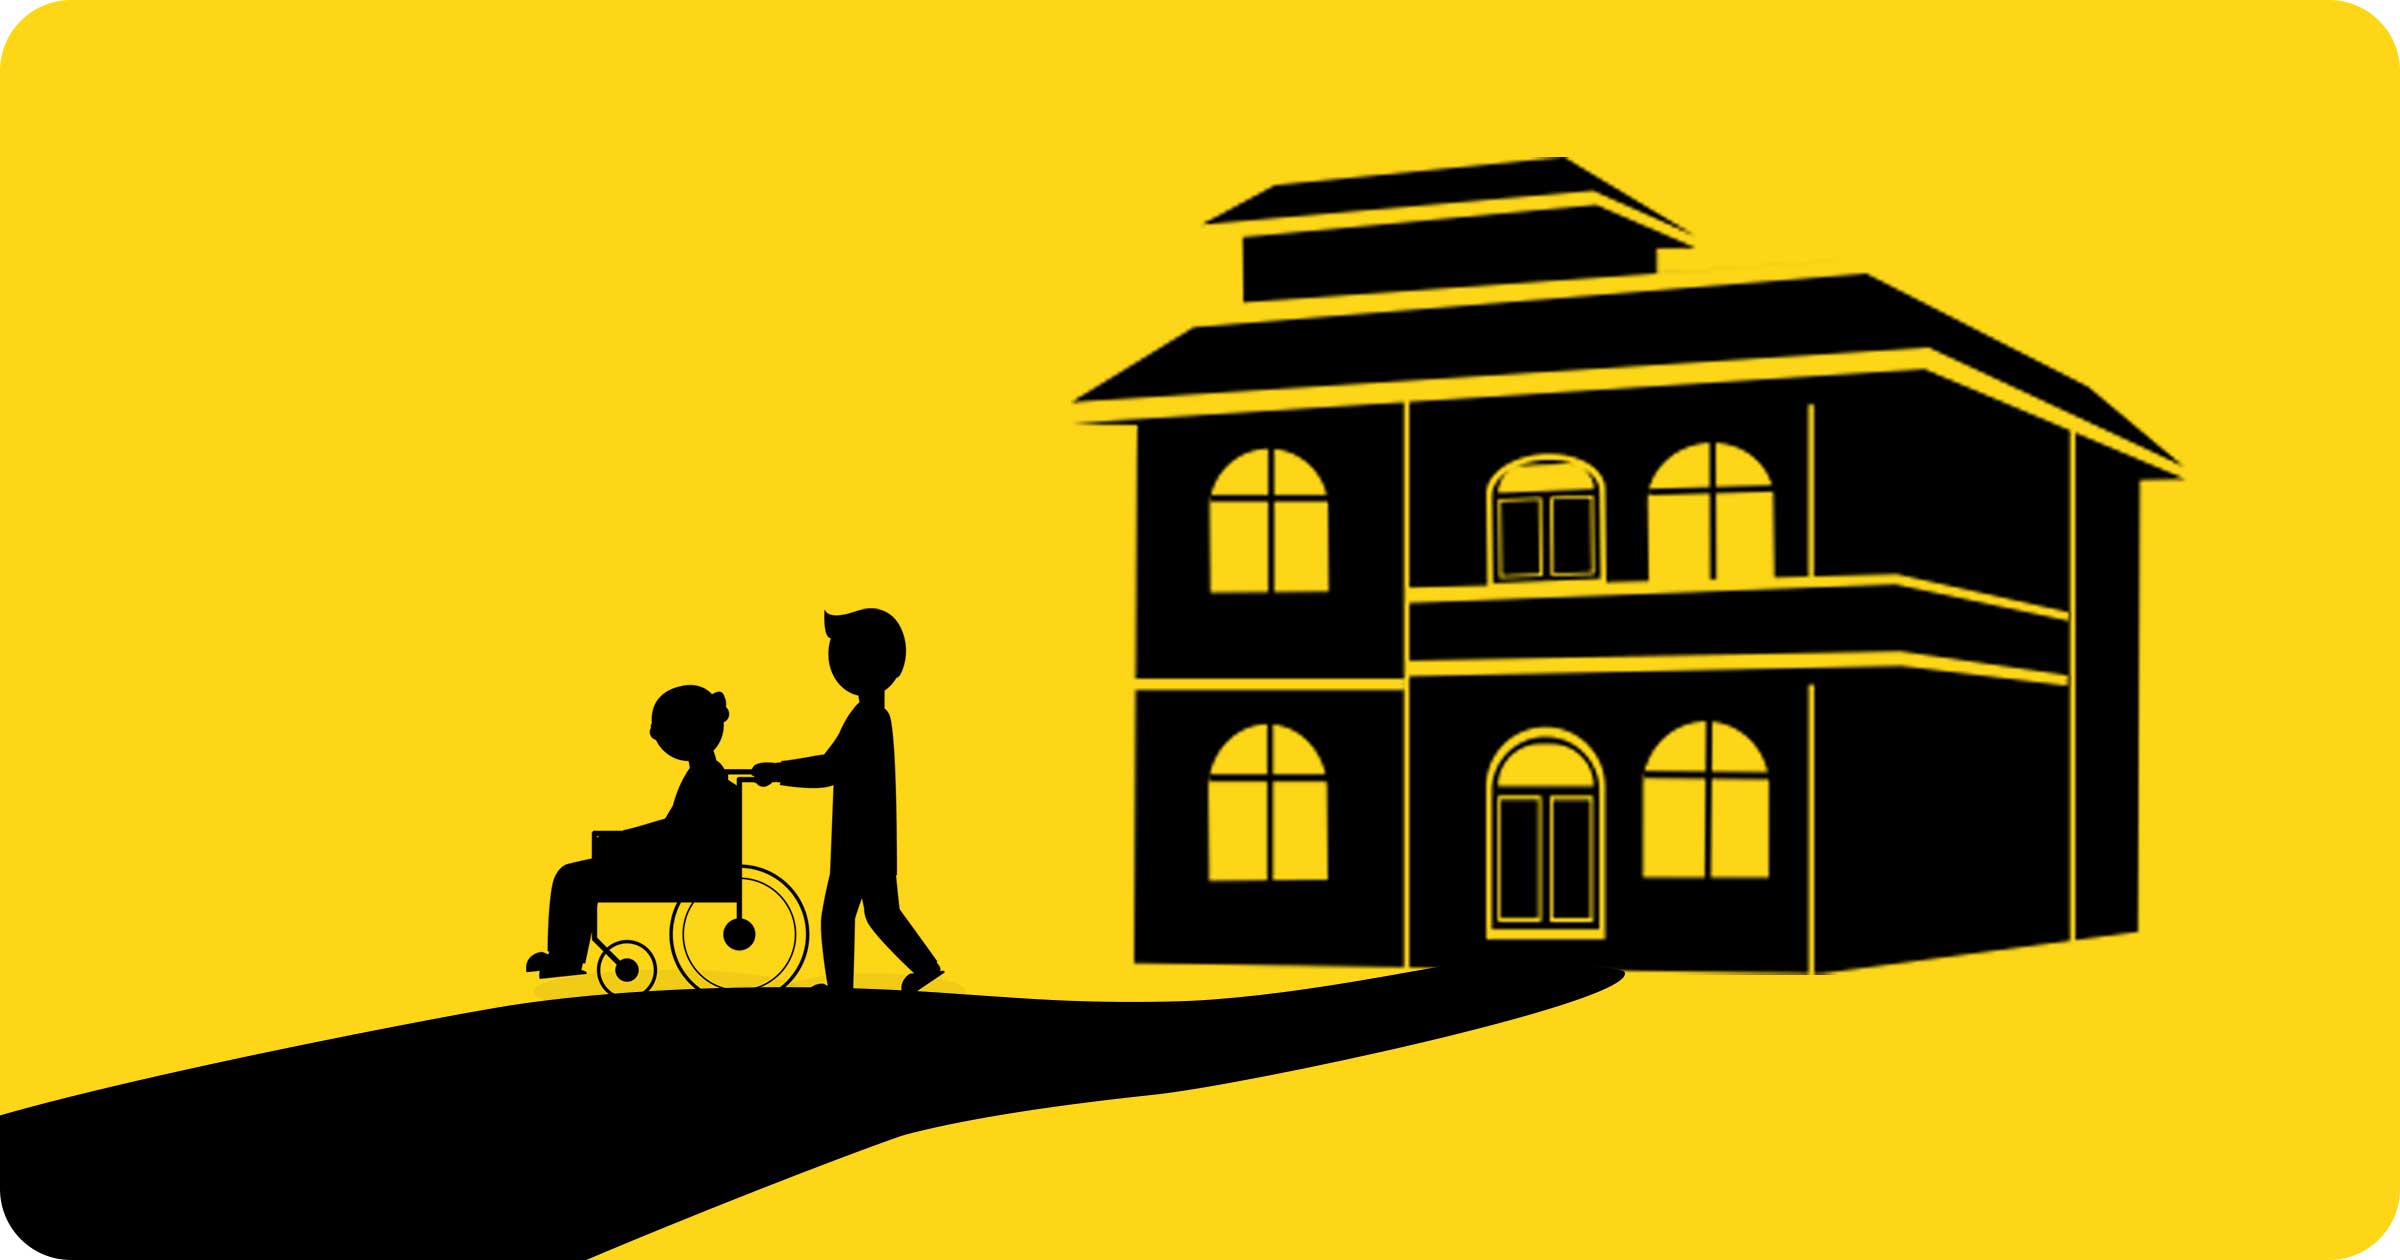 Yellow background with a black silhouette of an elderly impaired user in a wheelchair being pushed by a caregiver out of a care facility.